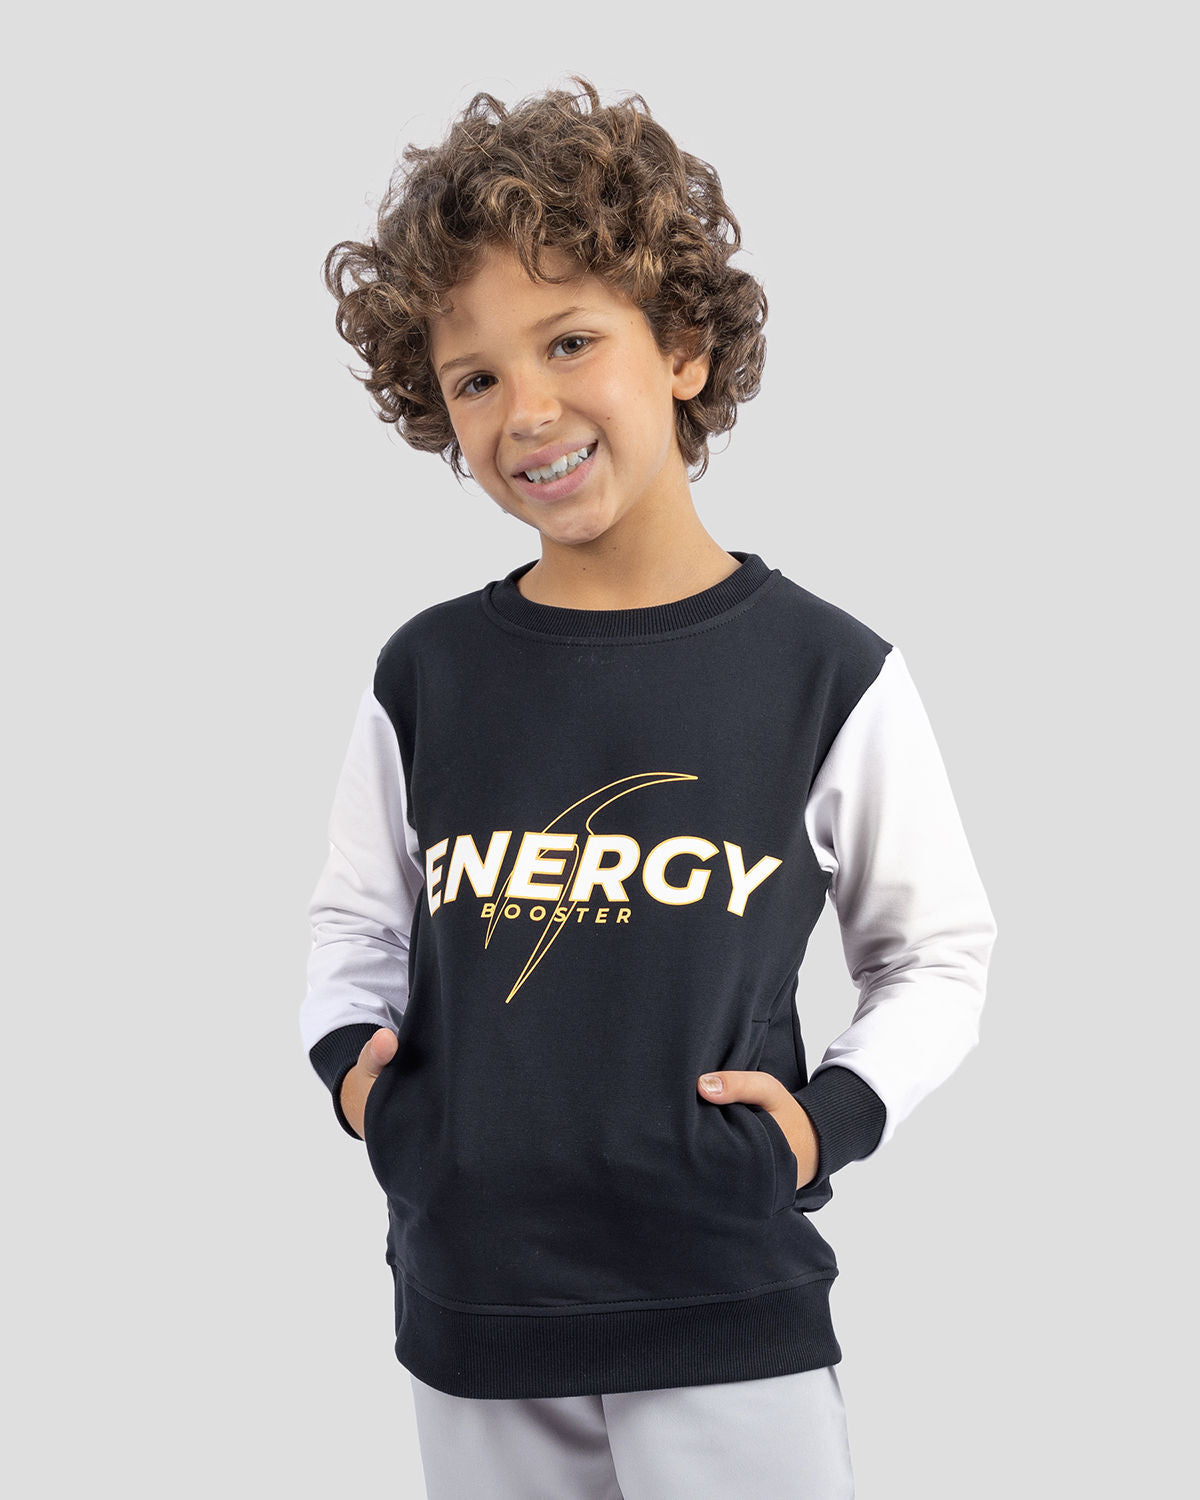 Photo by 𝗔𝗧𝗨ð�— SPORTSWEAR ® on December 20, 2022. May be an image of 1 boy wears a Black sweatshirt and a text said '' energy''.